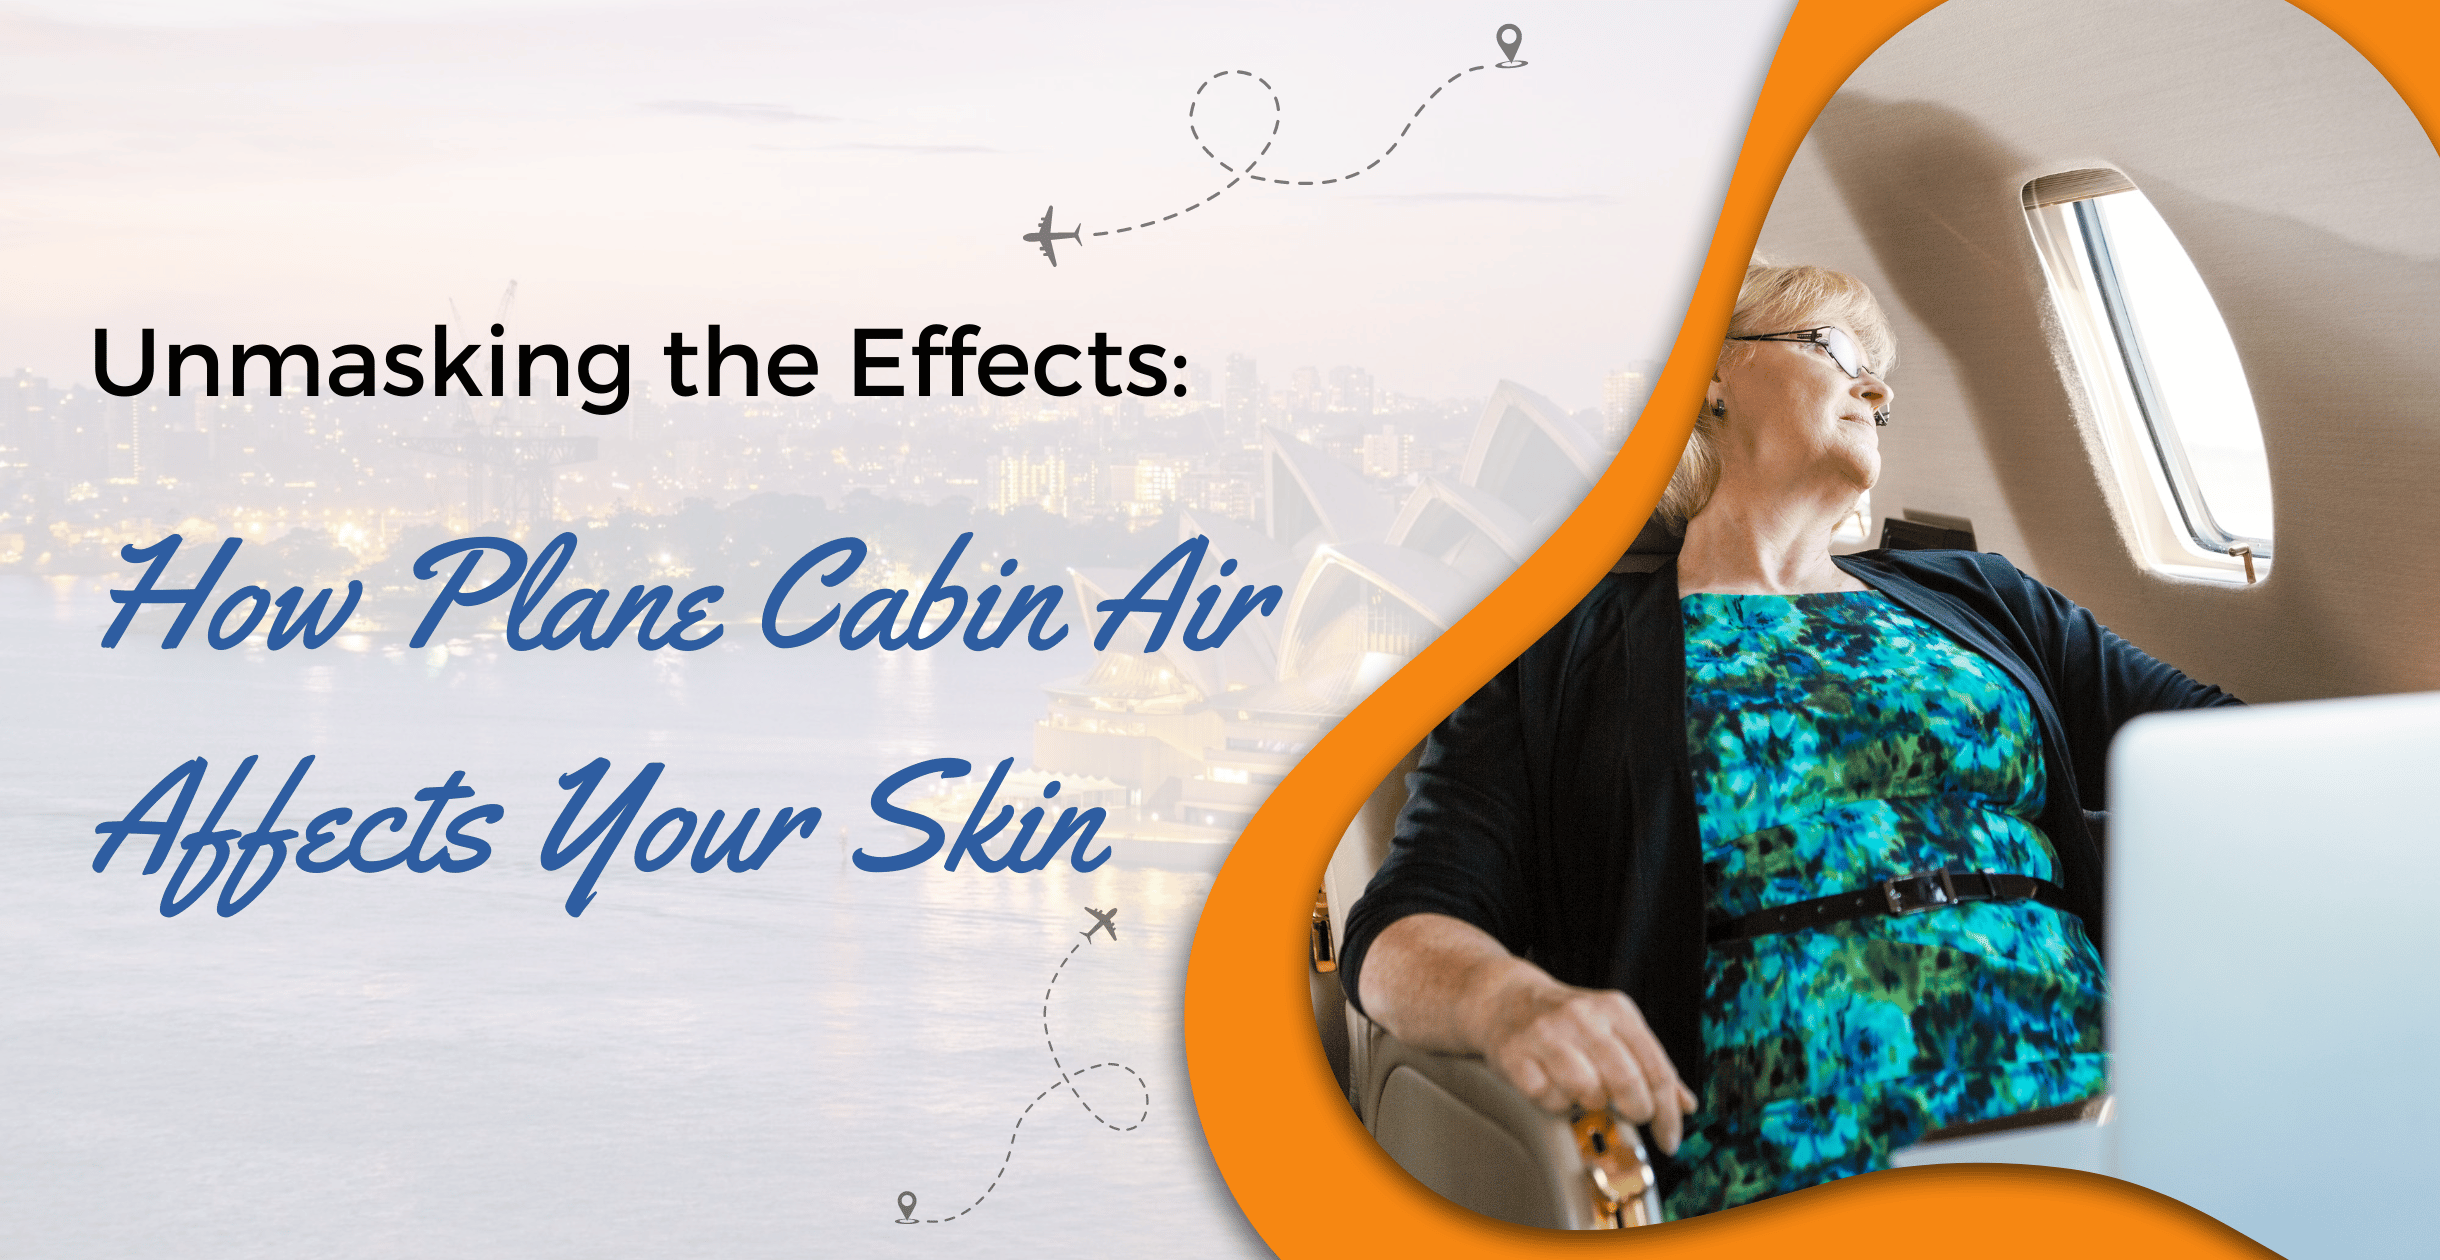 Unmasking the Effects: How Plane Cabin Air Affects Your Skin